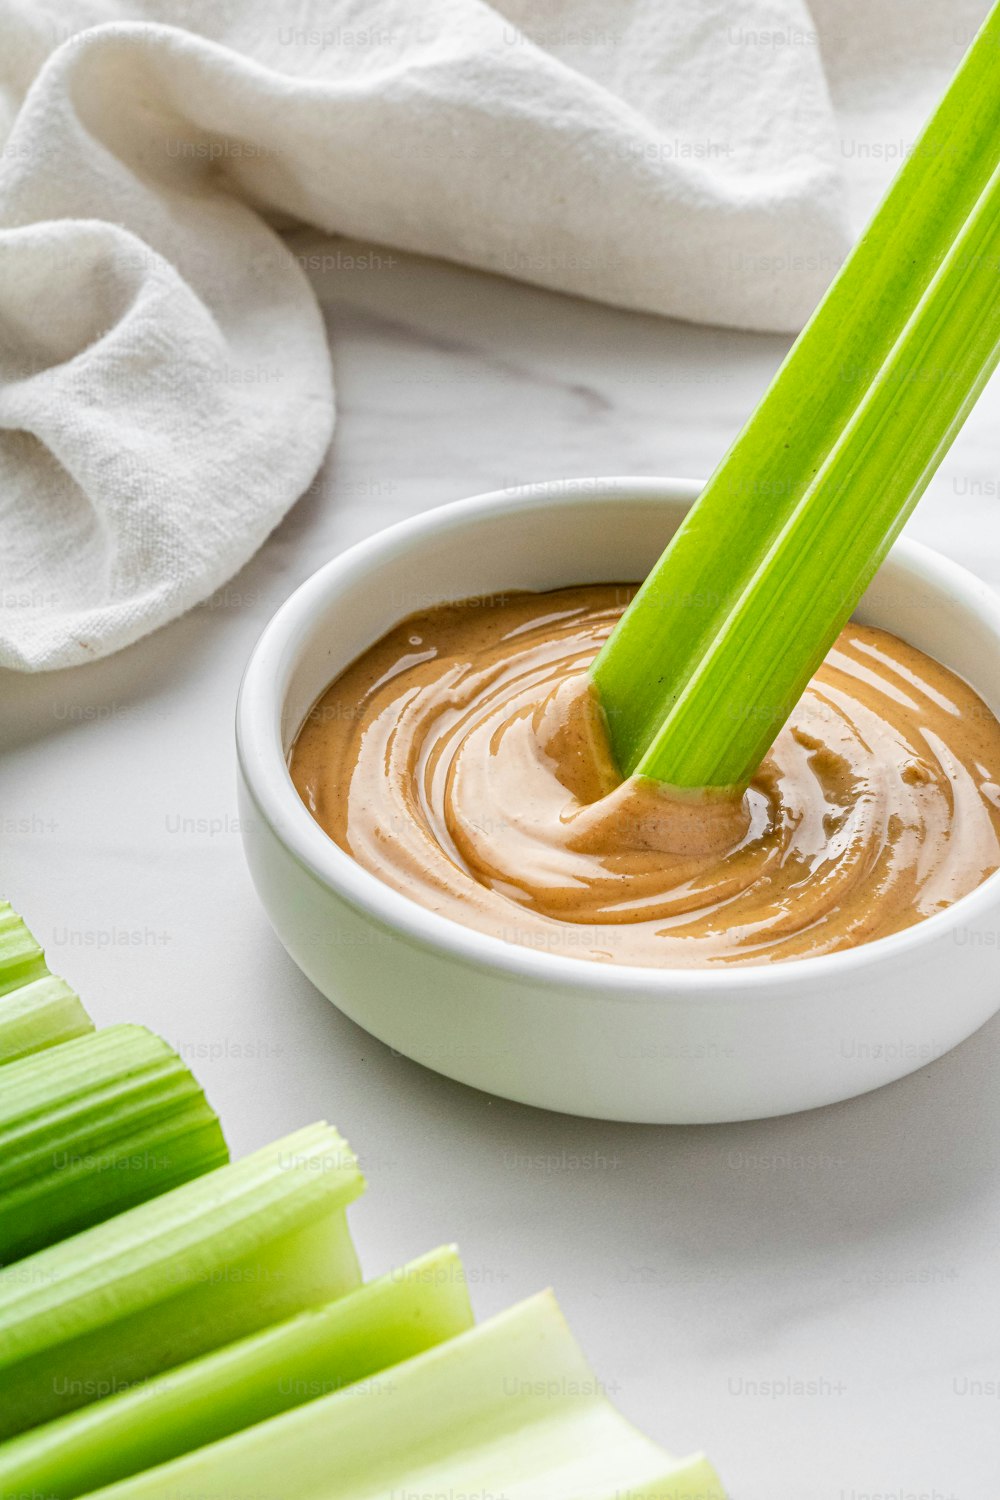 a bowl of peanut butter and celery sticks